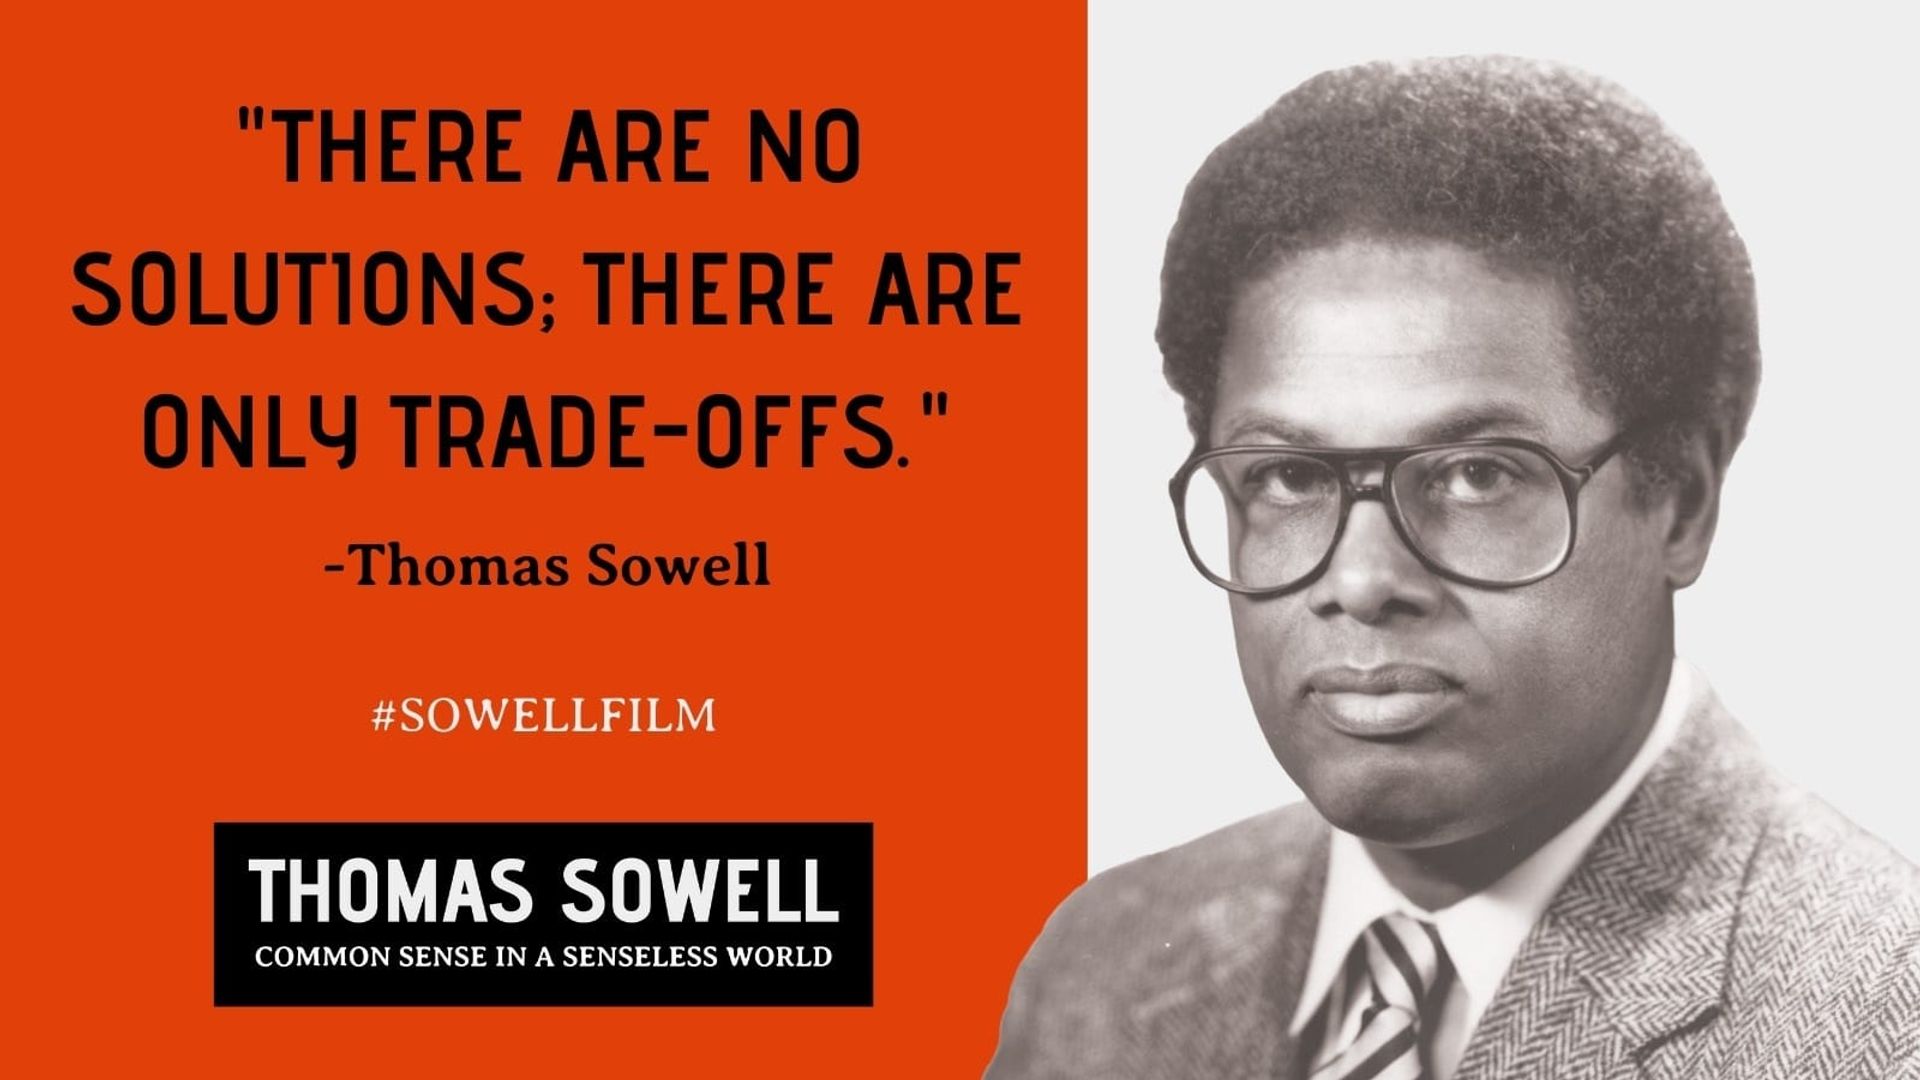 Thomas Sowell: Common Sense in a Senseless World, A Personal Exploration by Jason Riley background